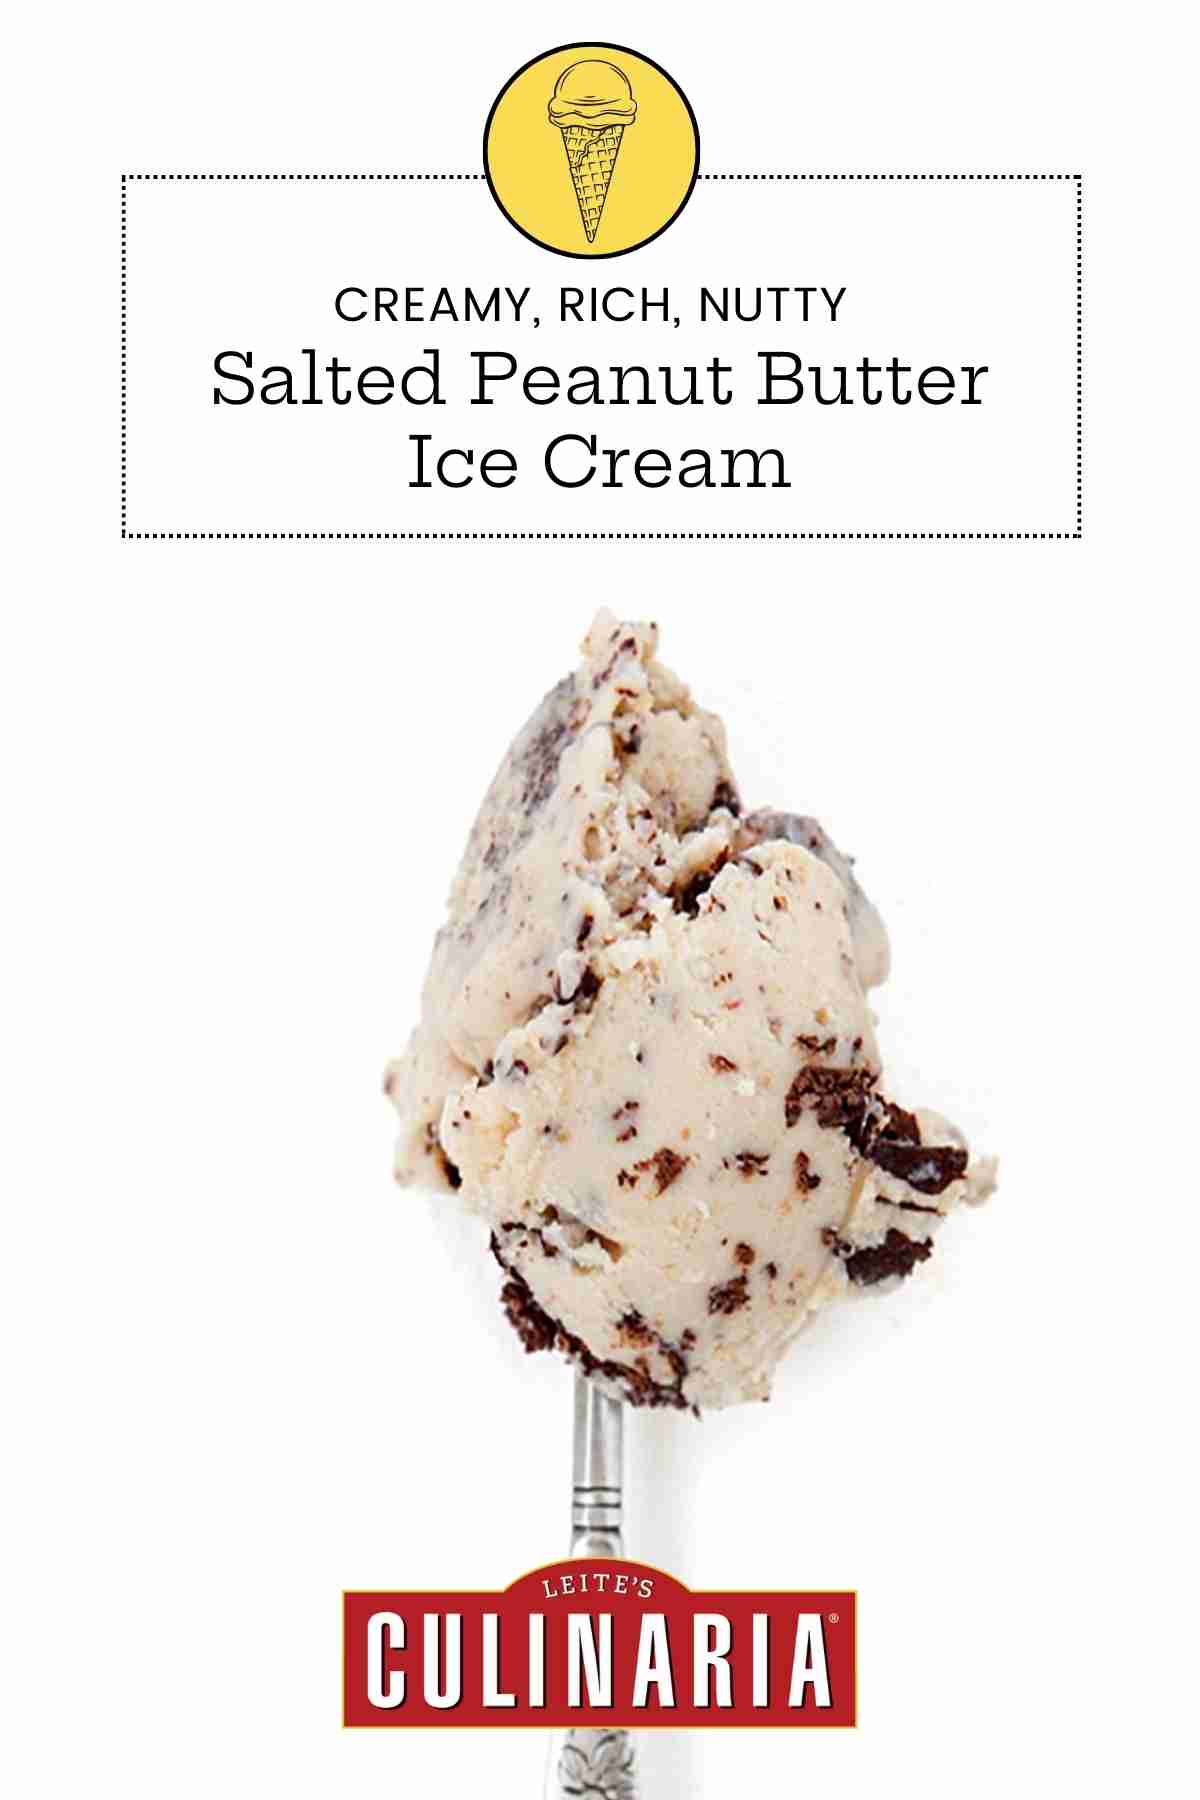 A scoop of salted peanut butter ice cream with chocolate flecks on a silver spoon.